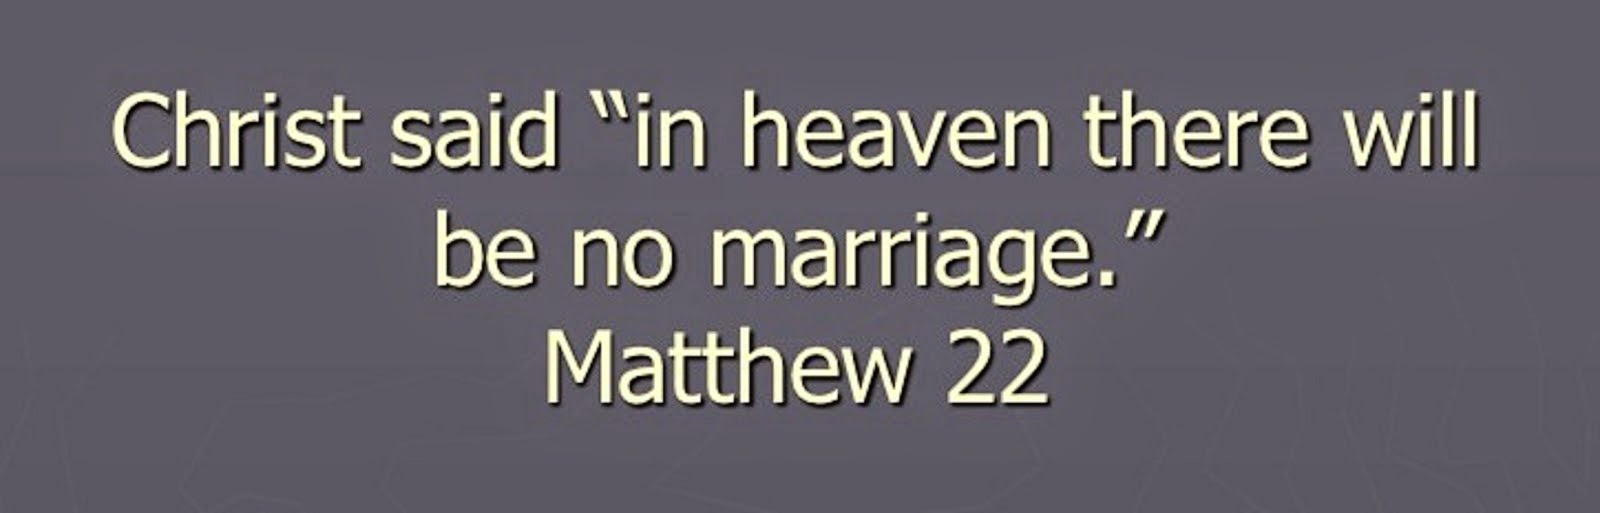 JESUS SAYS, "THERE IS NO MARRIAGE IN HEAVEN"